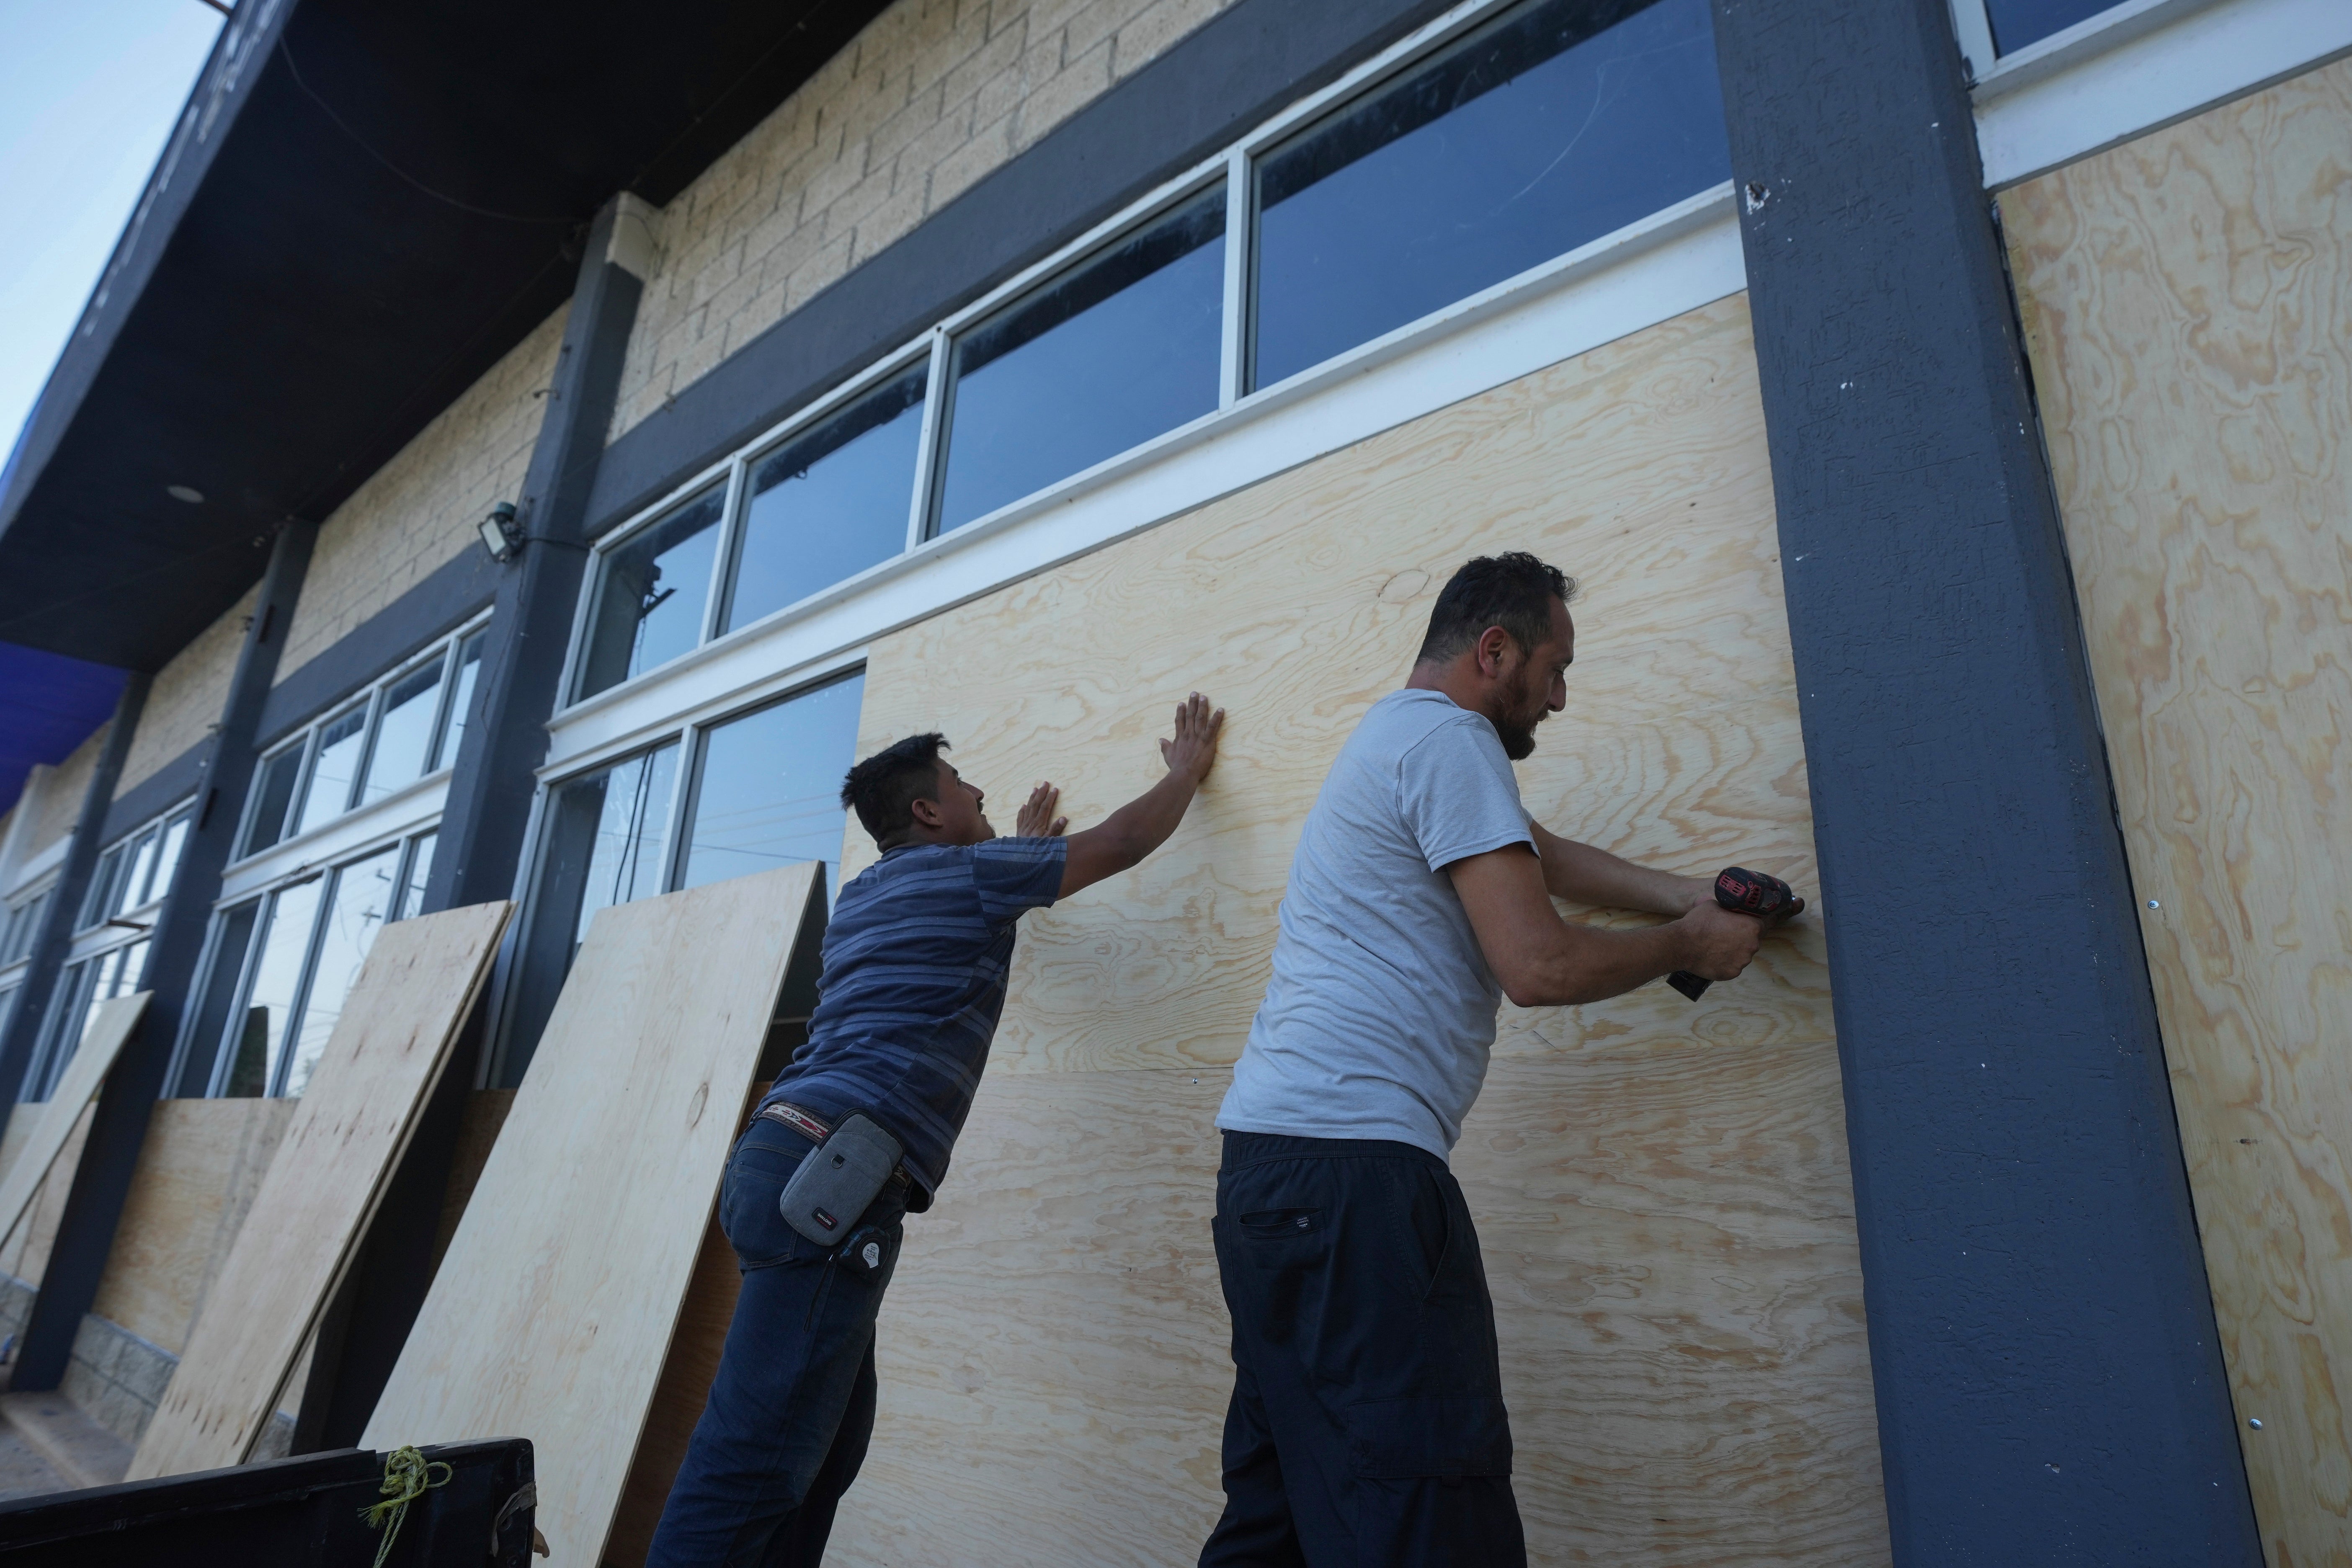 Furniture store employees board up windows for protection ahead of Hurricane Beryl’s expected arrival